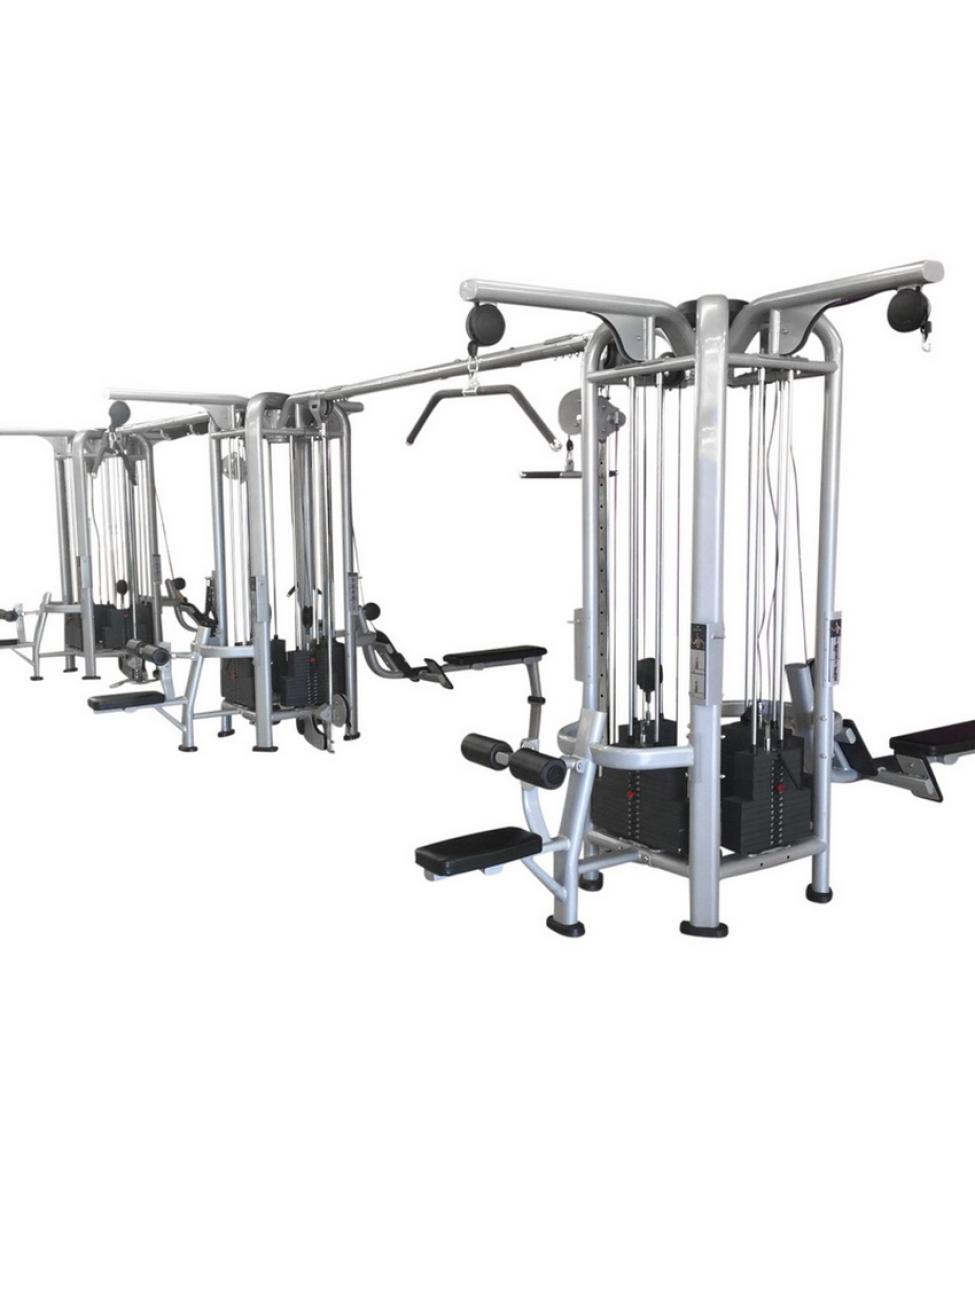 Muscle-D Deluxe 12 Stack Jungle Gym Version A